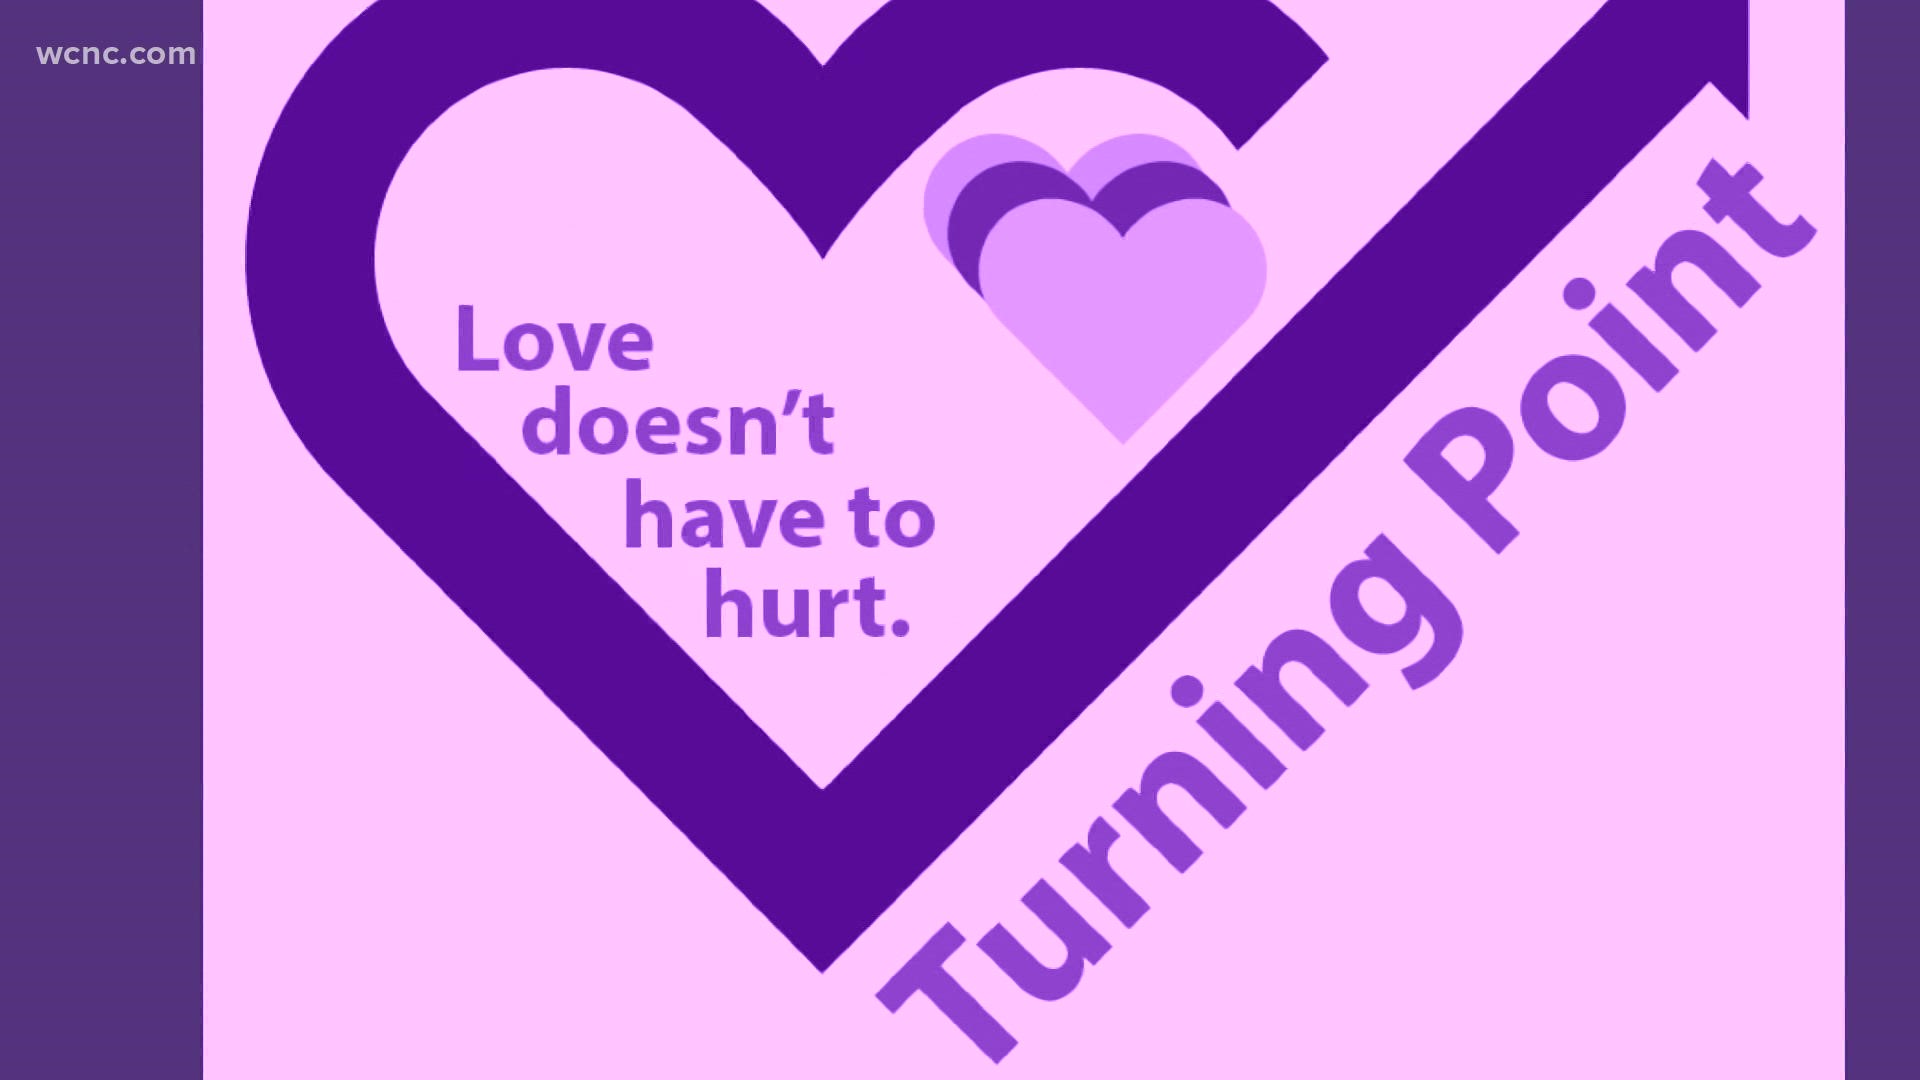 If you can safely talk to a staff member, call Turning Point's Crisis Line at 704-283-7233.